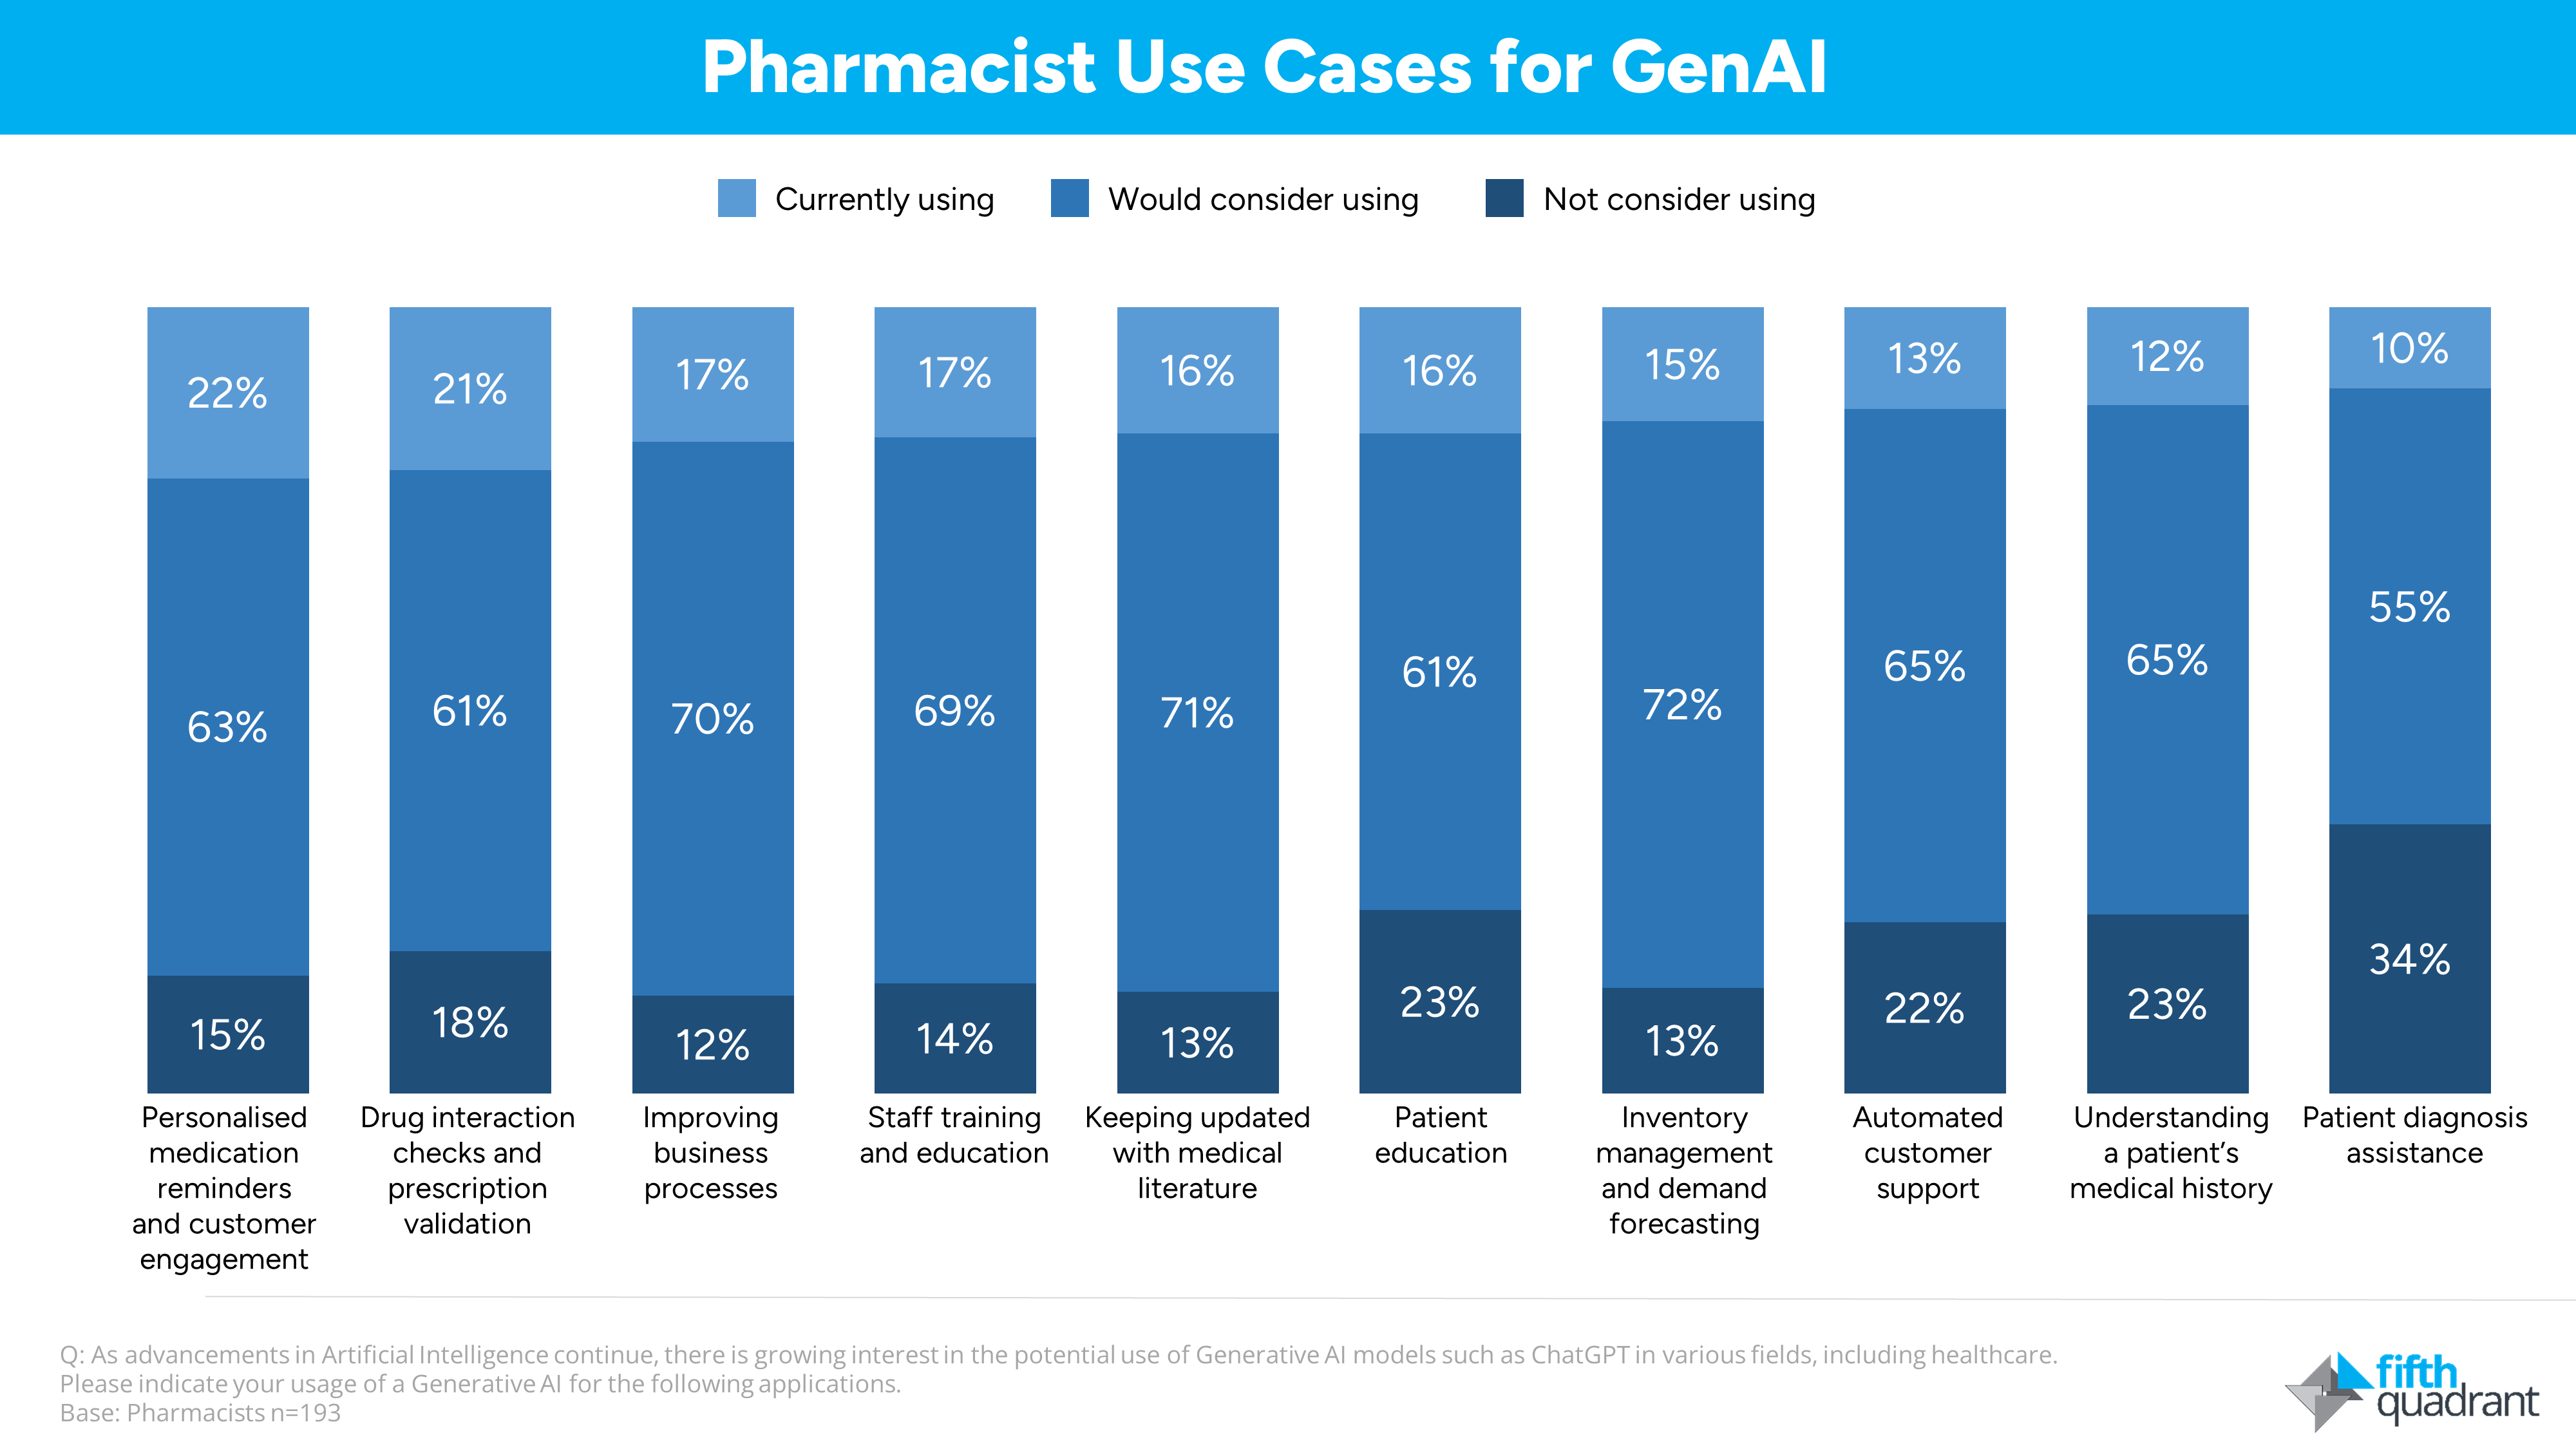 Pharmacist use cases for Generative AI.

Fifth Quadrant undertook a survey of 193 Australian pharmacists to understand their attitudes and use of GenAI models such as ChatGPT and Bard in their pharmacy.